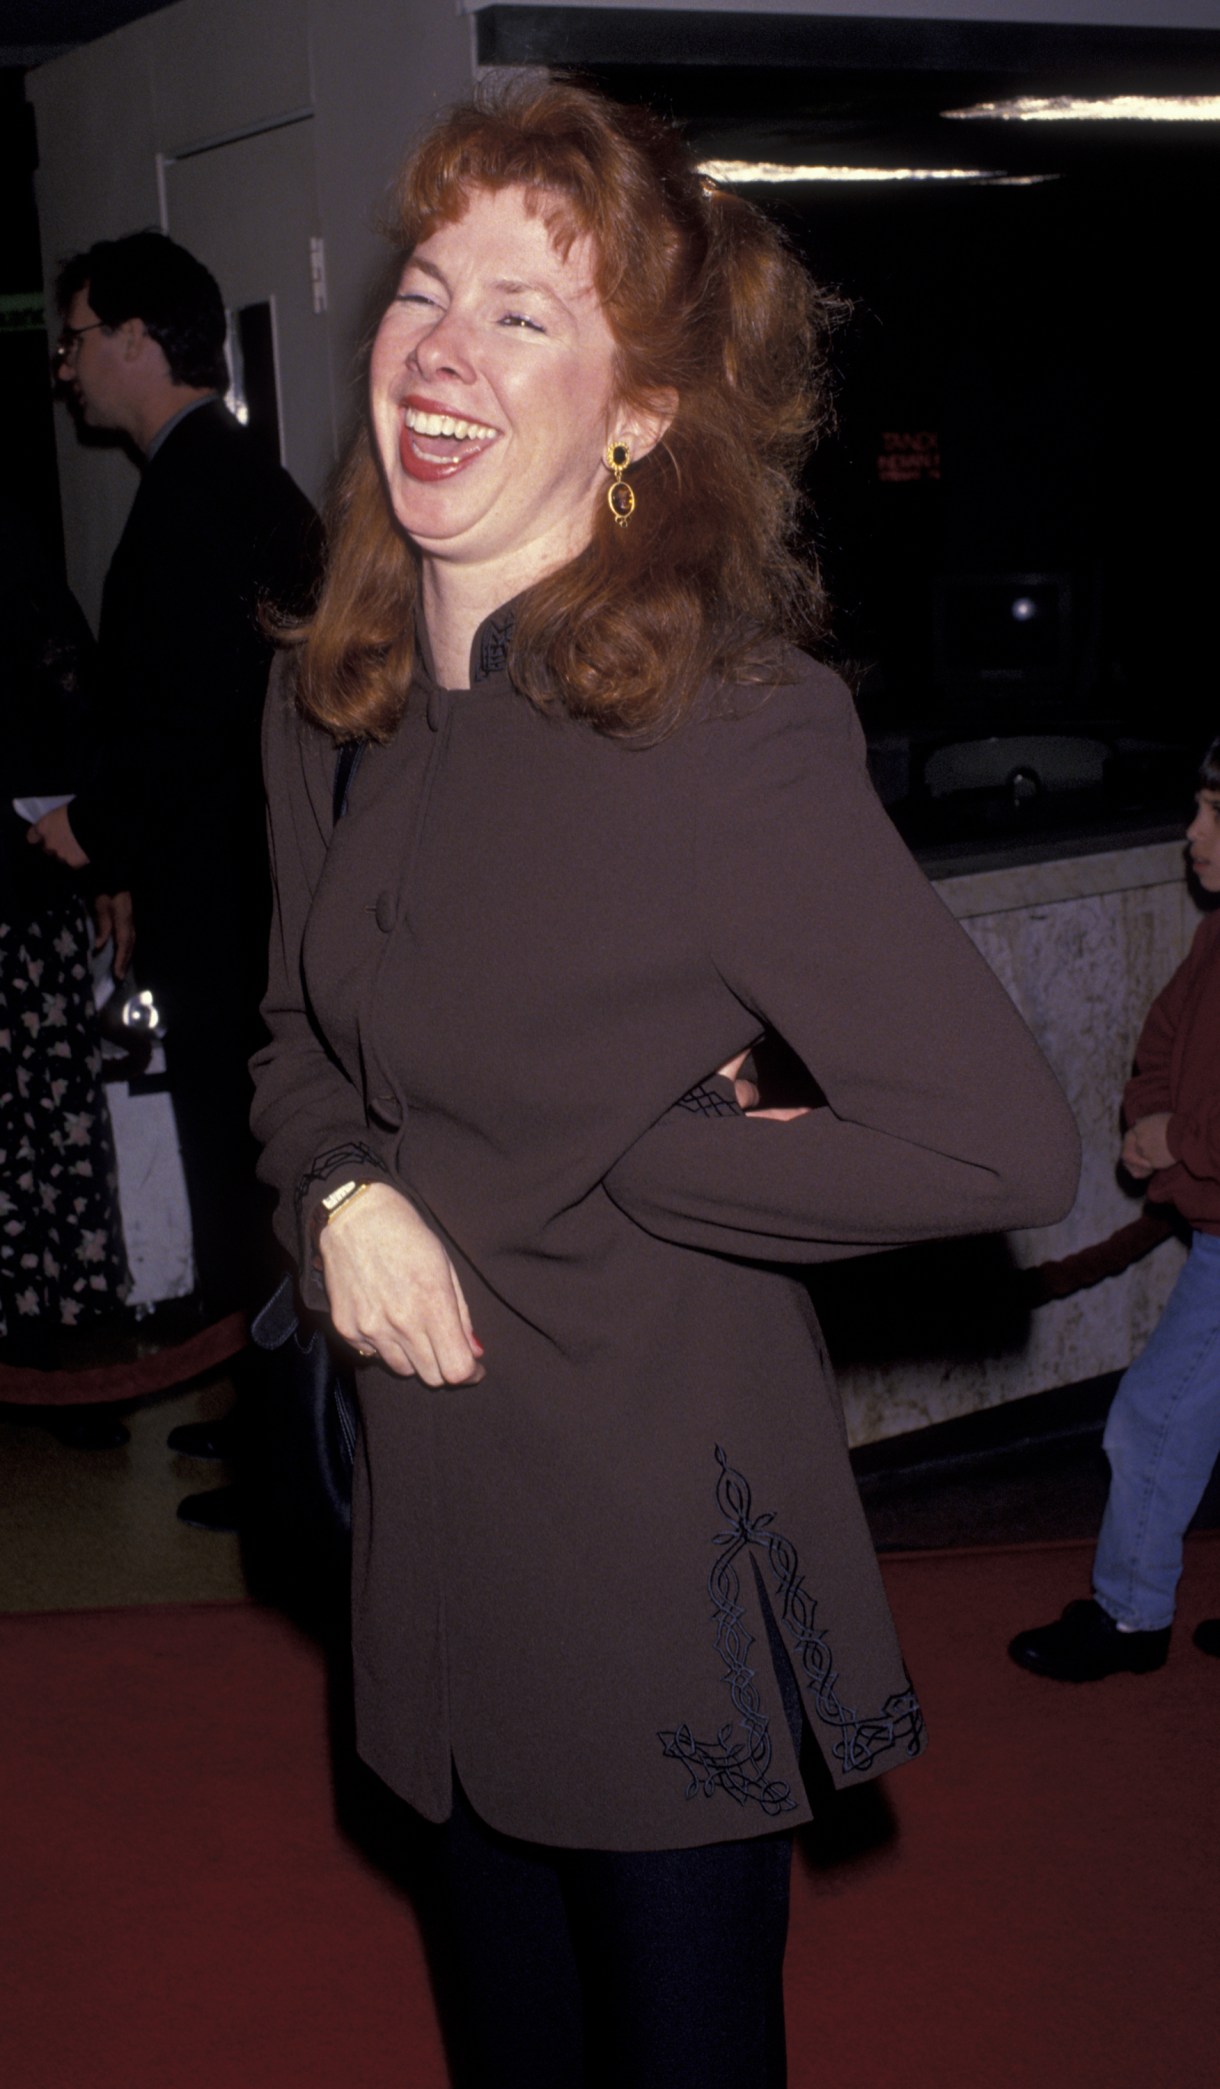 Actress Siobhan Fallon attends the screening of 'Greedy' on February 22, 1994 at Mann Bruin Theater in Westwood, California.